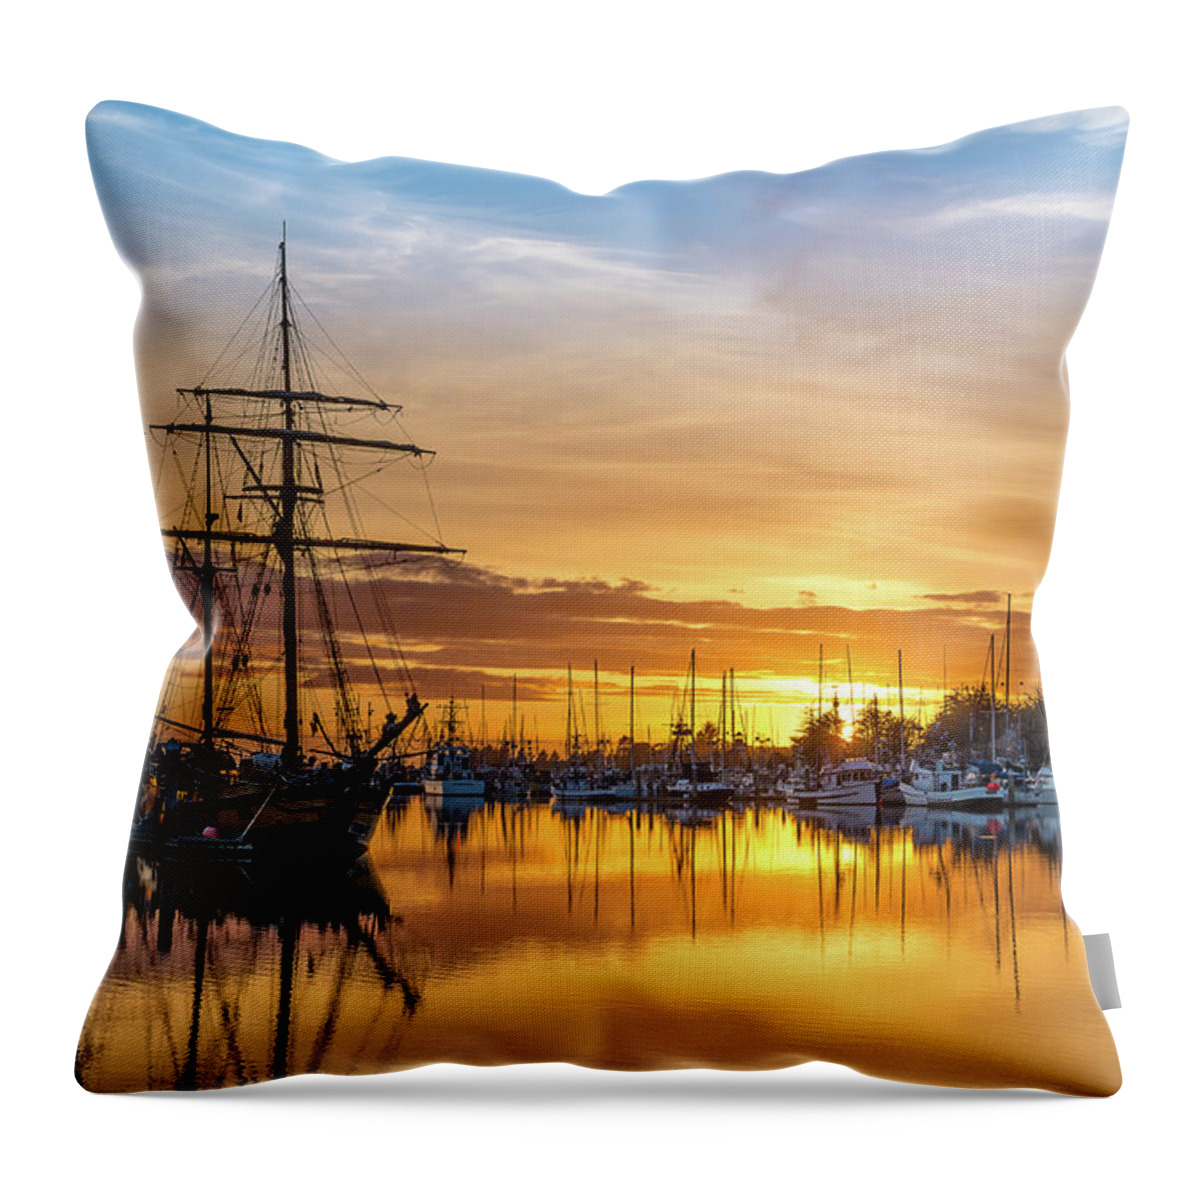 Woodley Island Marina Throw Pillow featuring the photograph Tall Ships Sunset 1 by Greg Nyquist